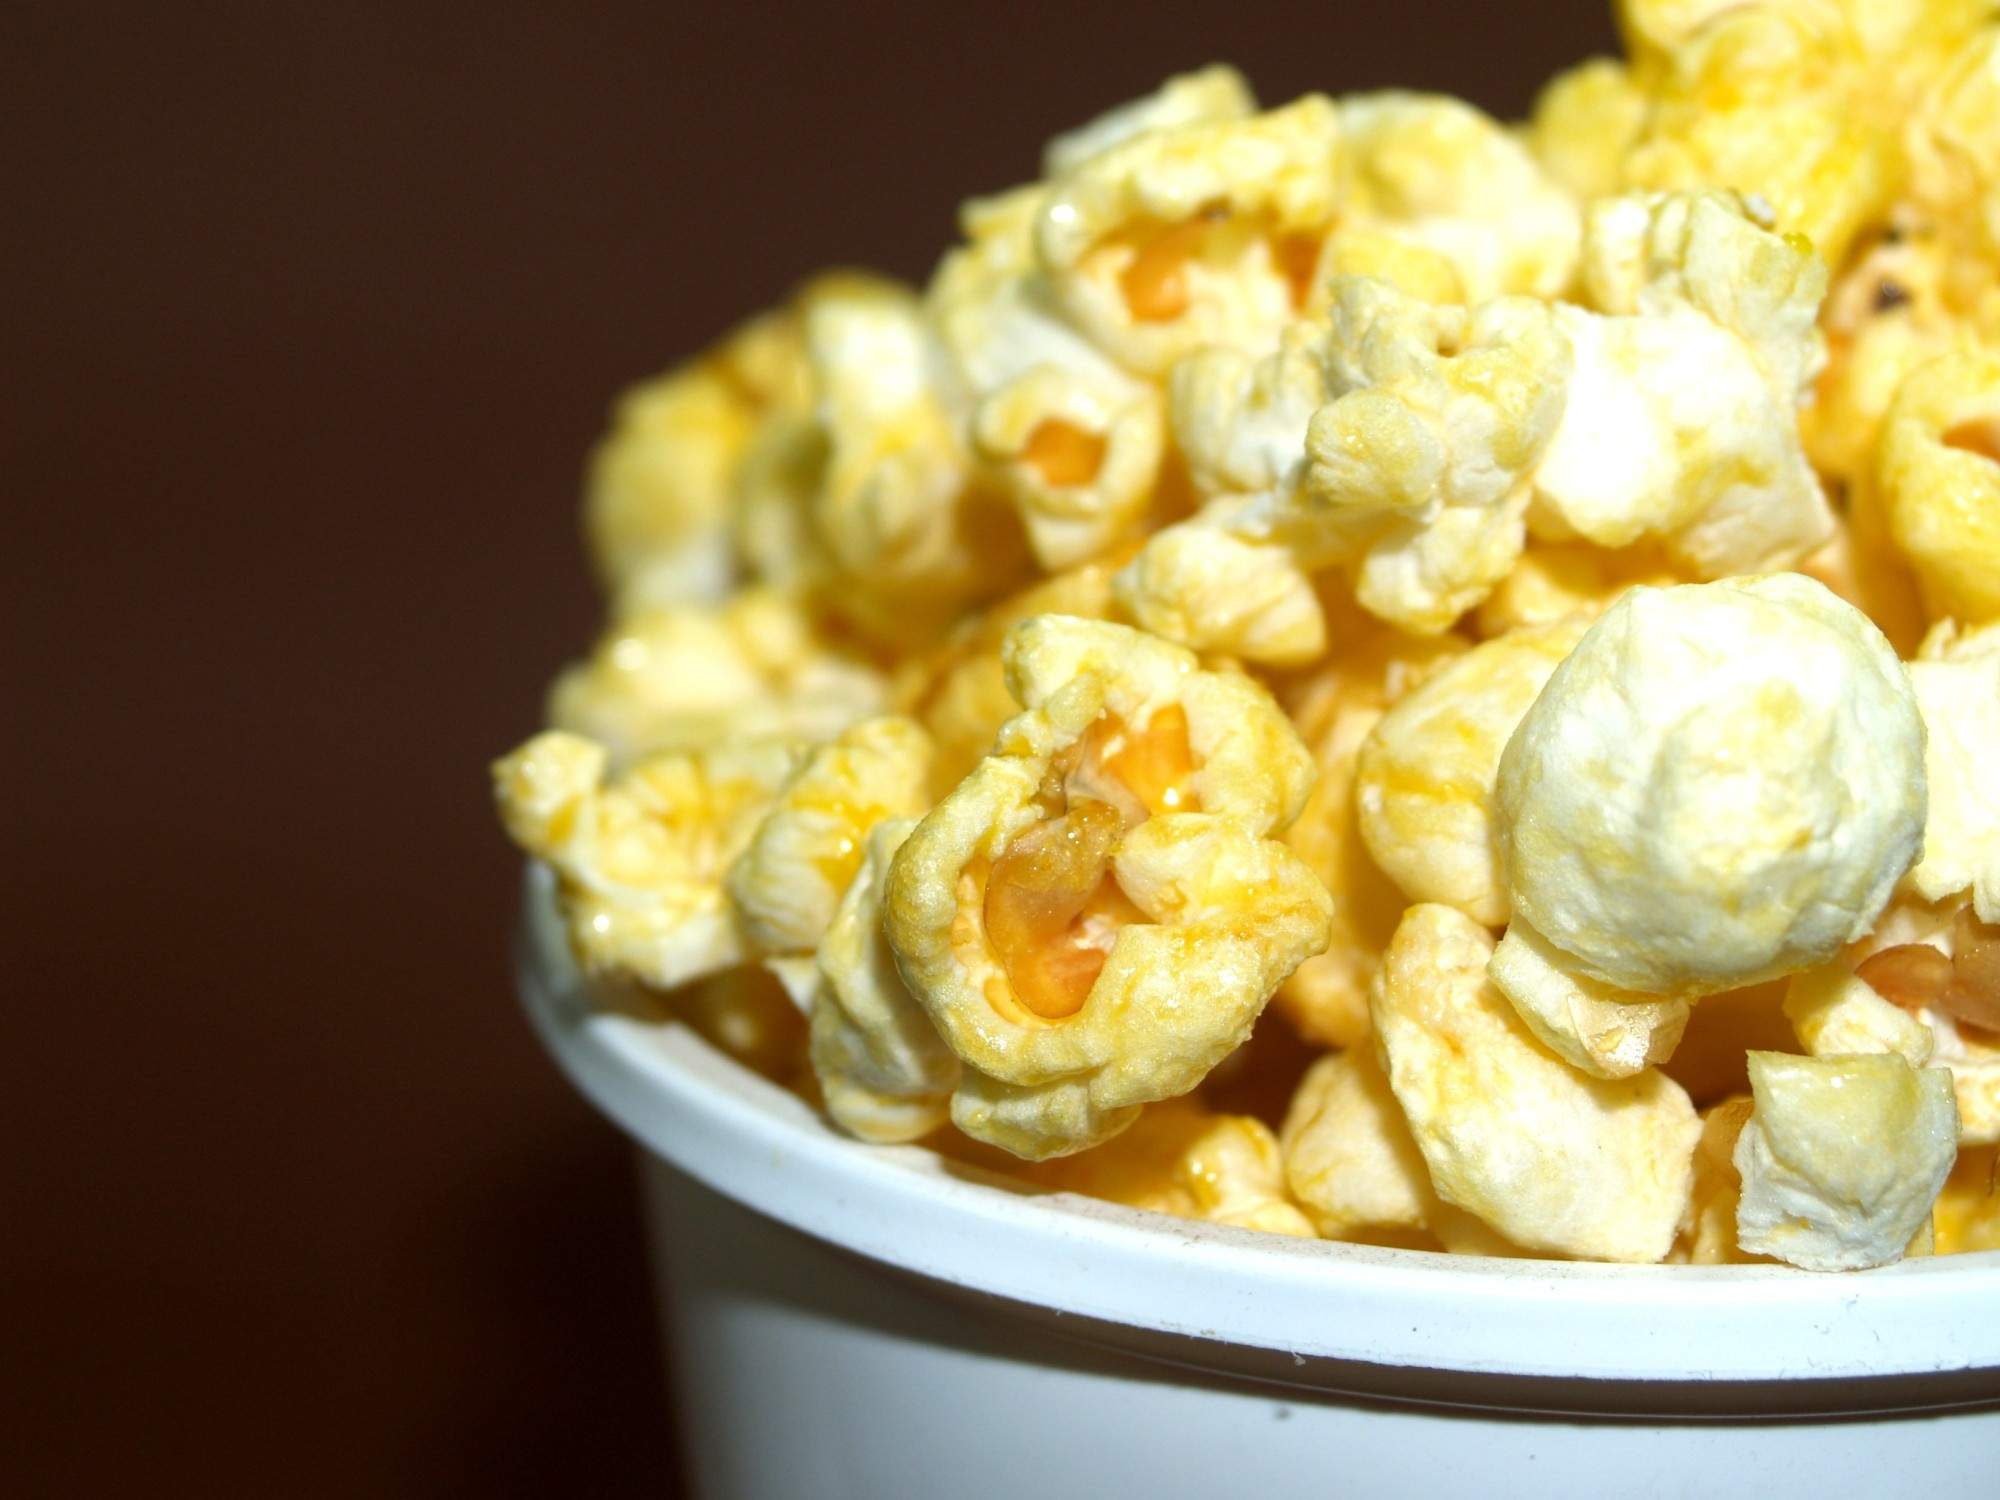 White Popcorn vs Yellow Popcorn: What Are the Differences?